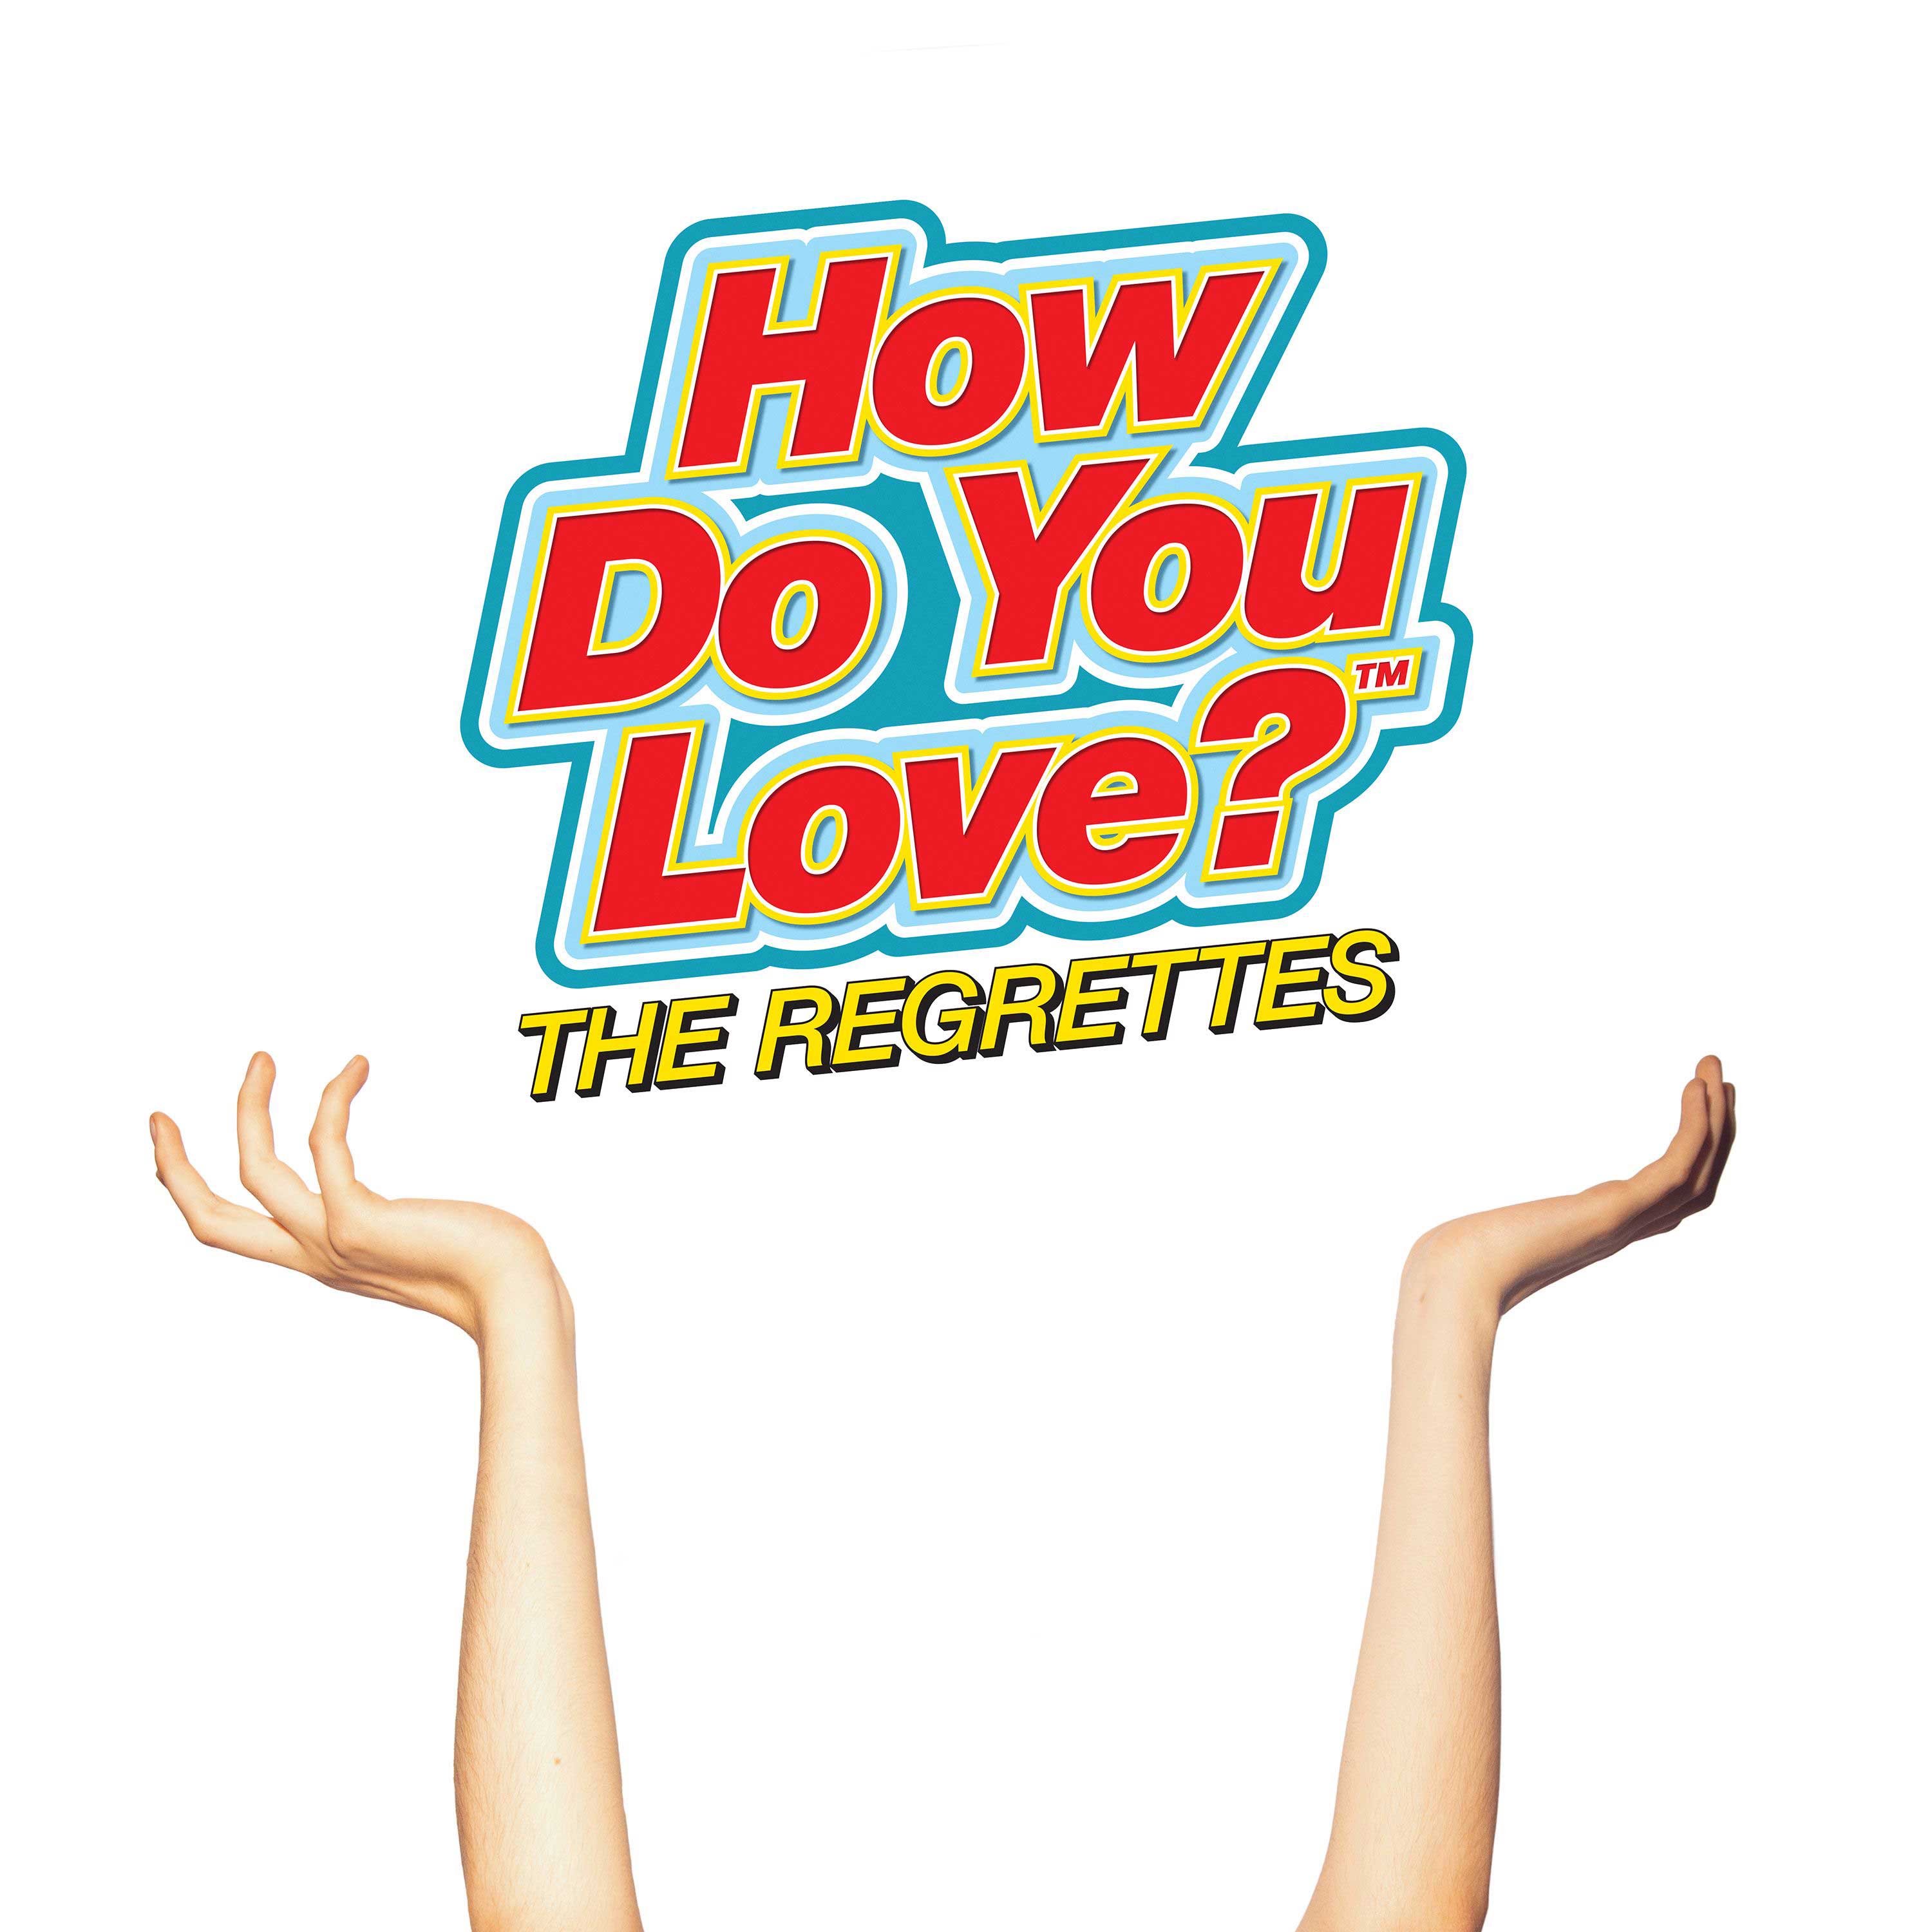 GRAPHIC: Album artwork for The Regrettes' album "How Do You Love?" Graphic courtesy of Warner Records.